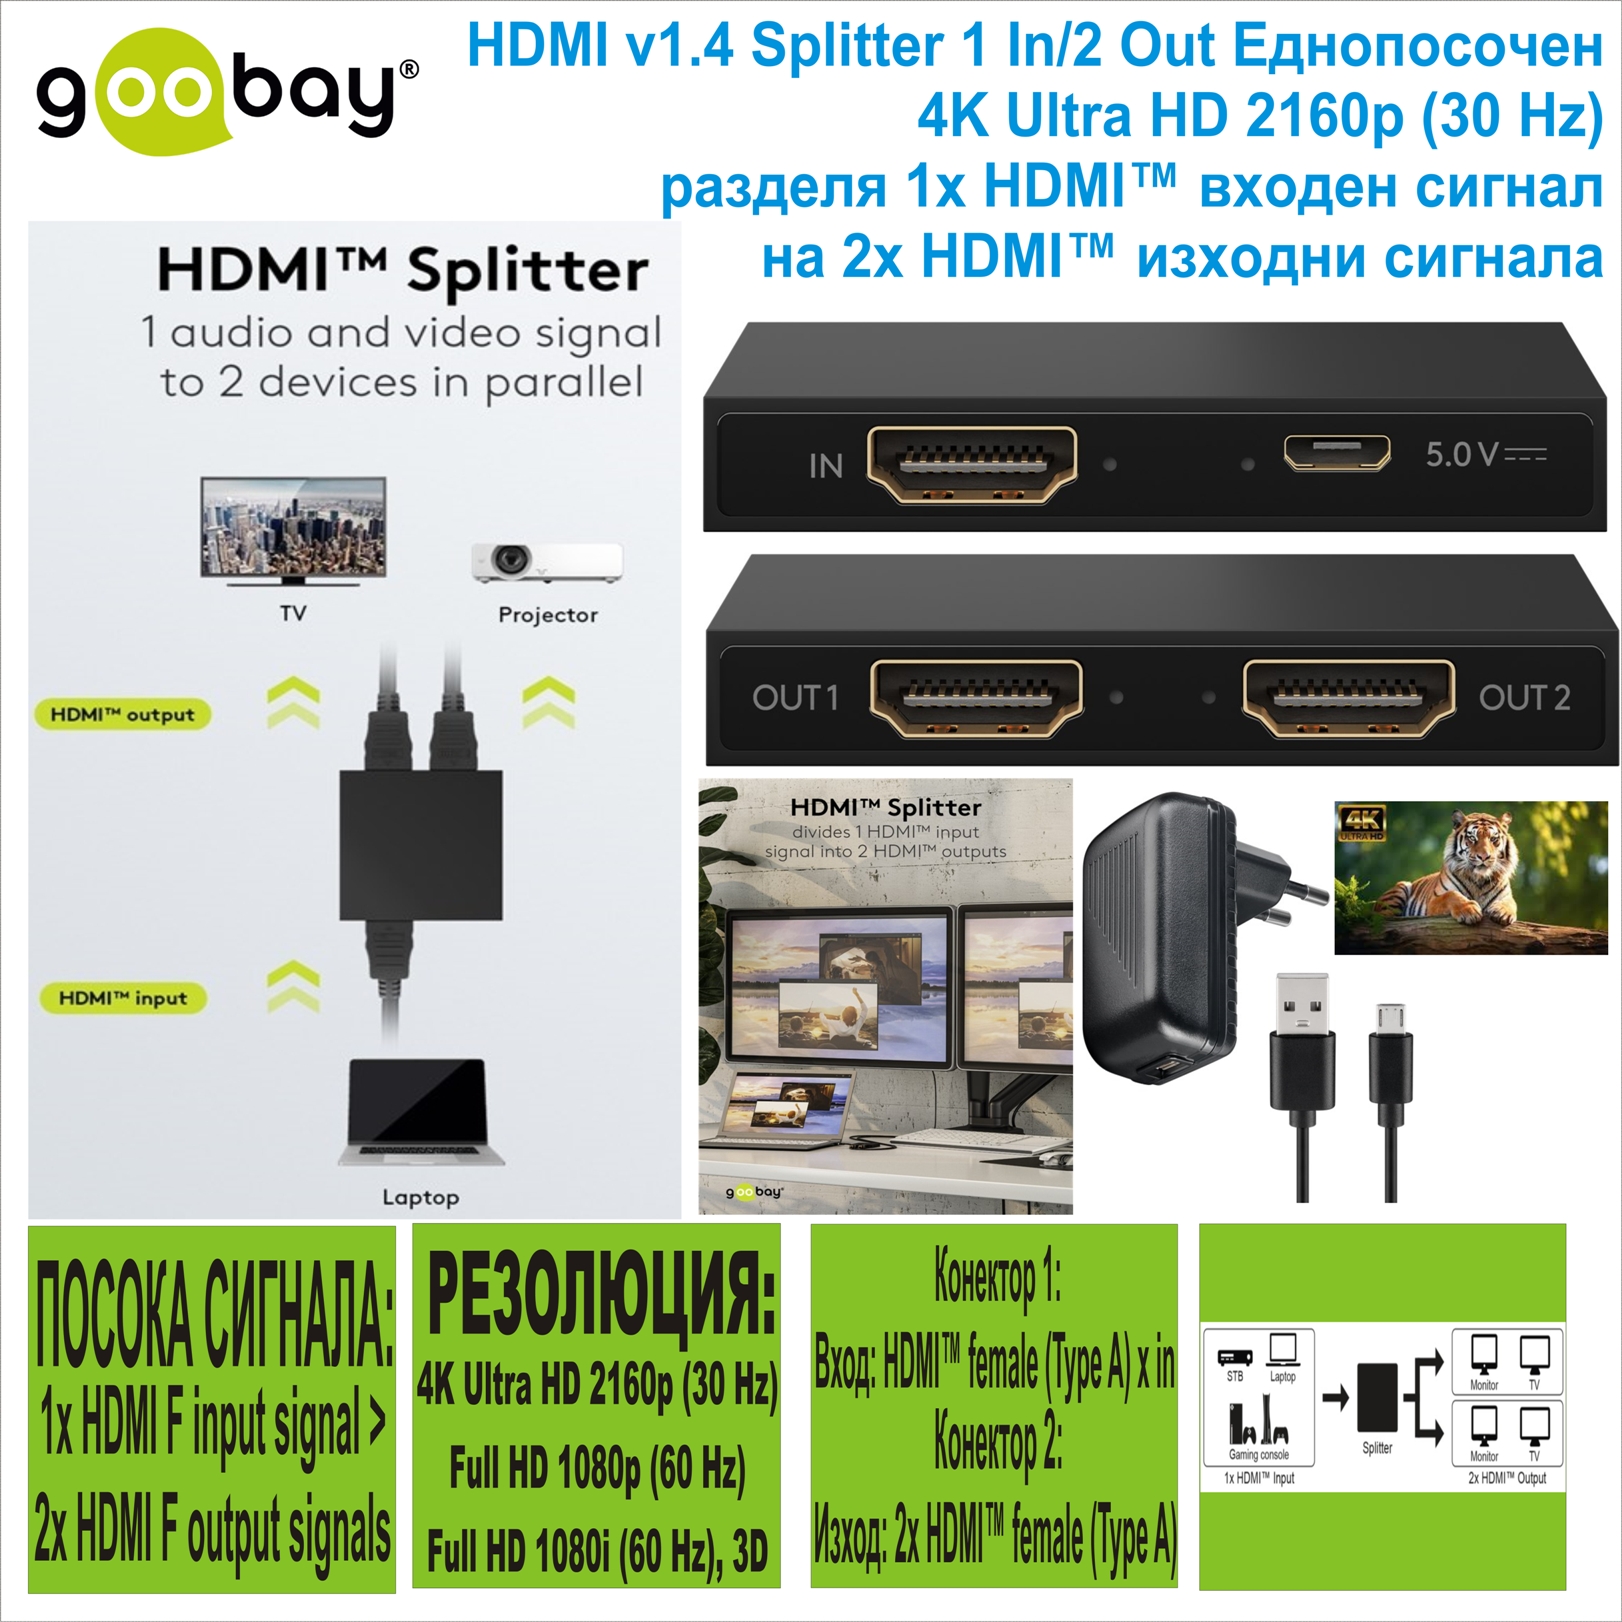 HDMI v1.4 Splitter 1 In/2 Out Еднопосочен Goobay